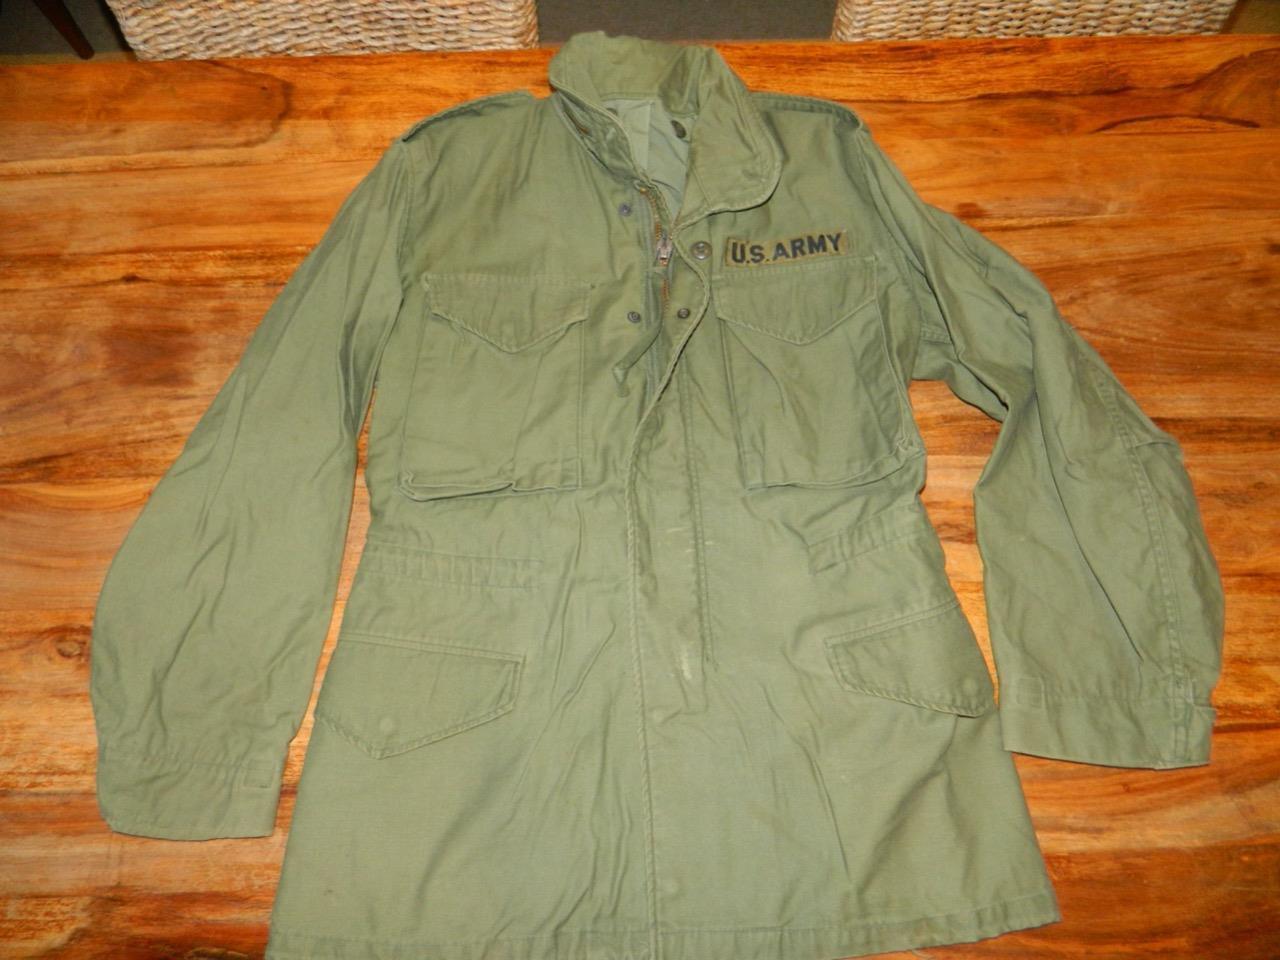 Genuine Vintage 70s 80s US Army Issue Olive Green M-65 M65 Combat Jacket - Small